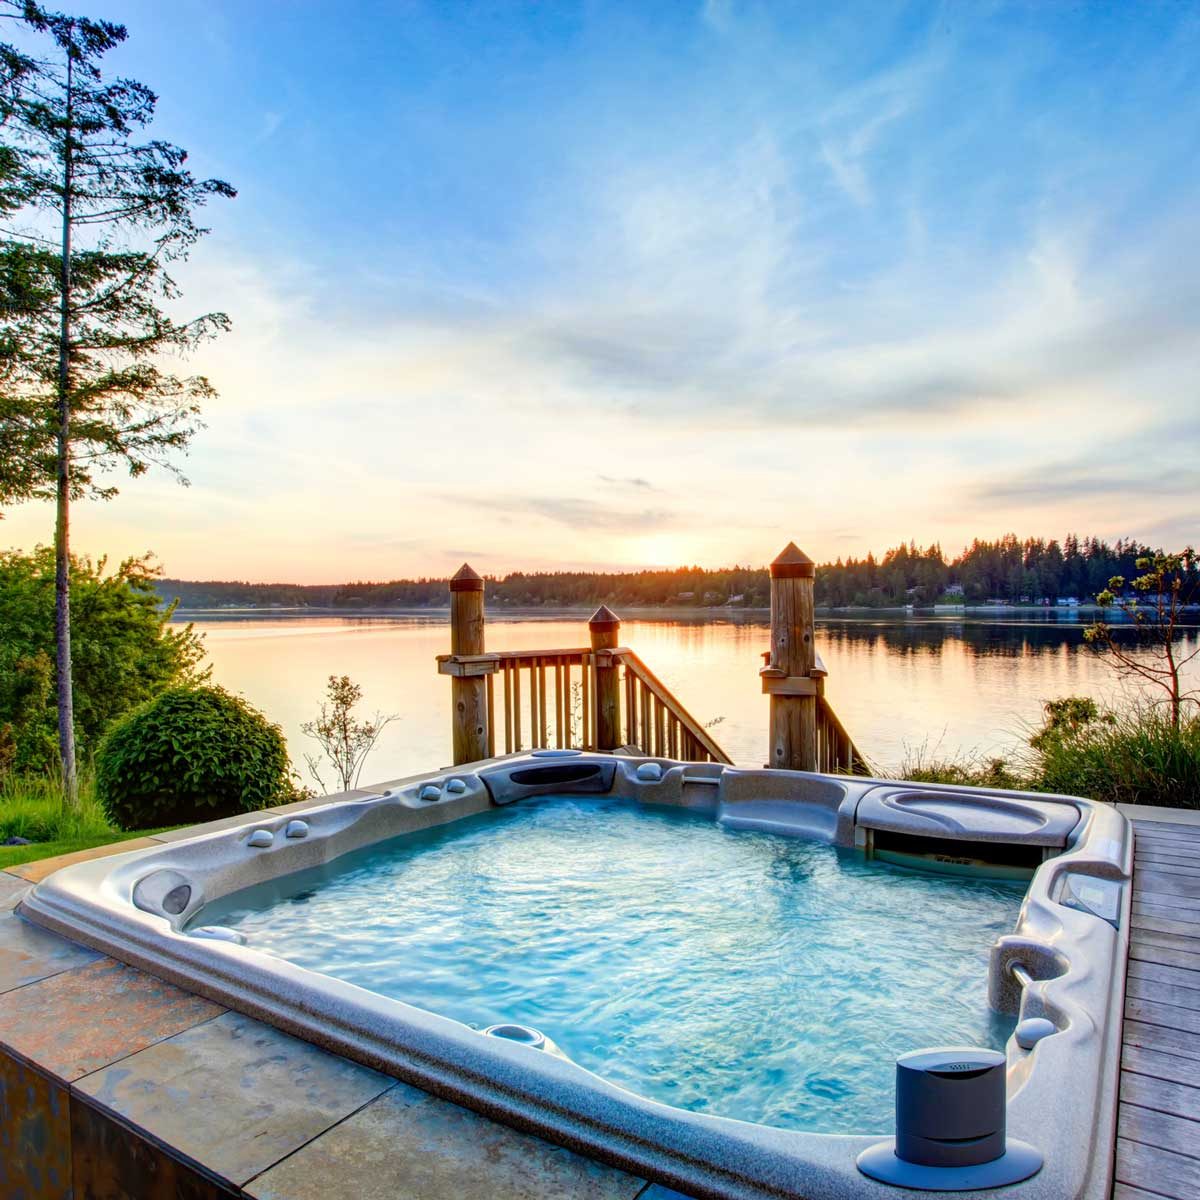 How Much Does a Hot Tub Actually Cost?